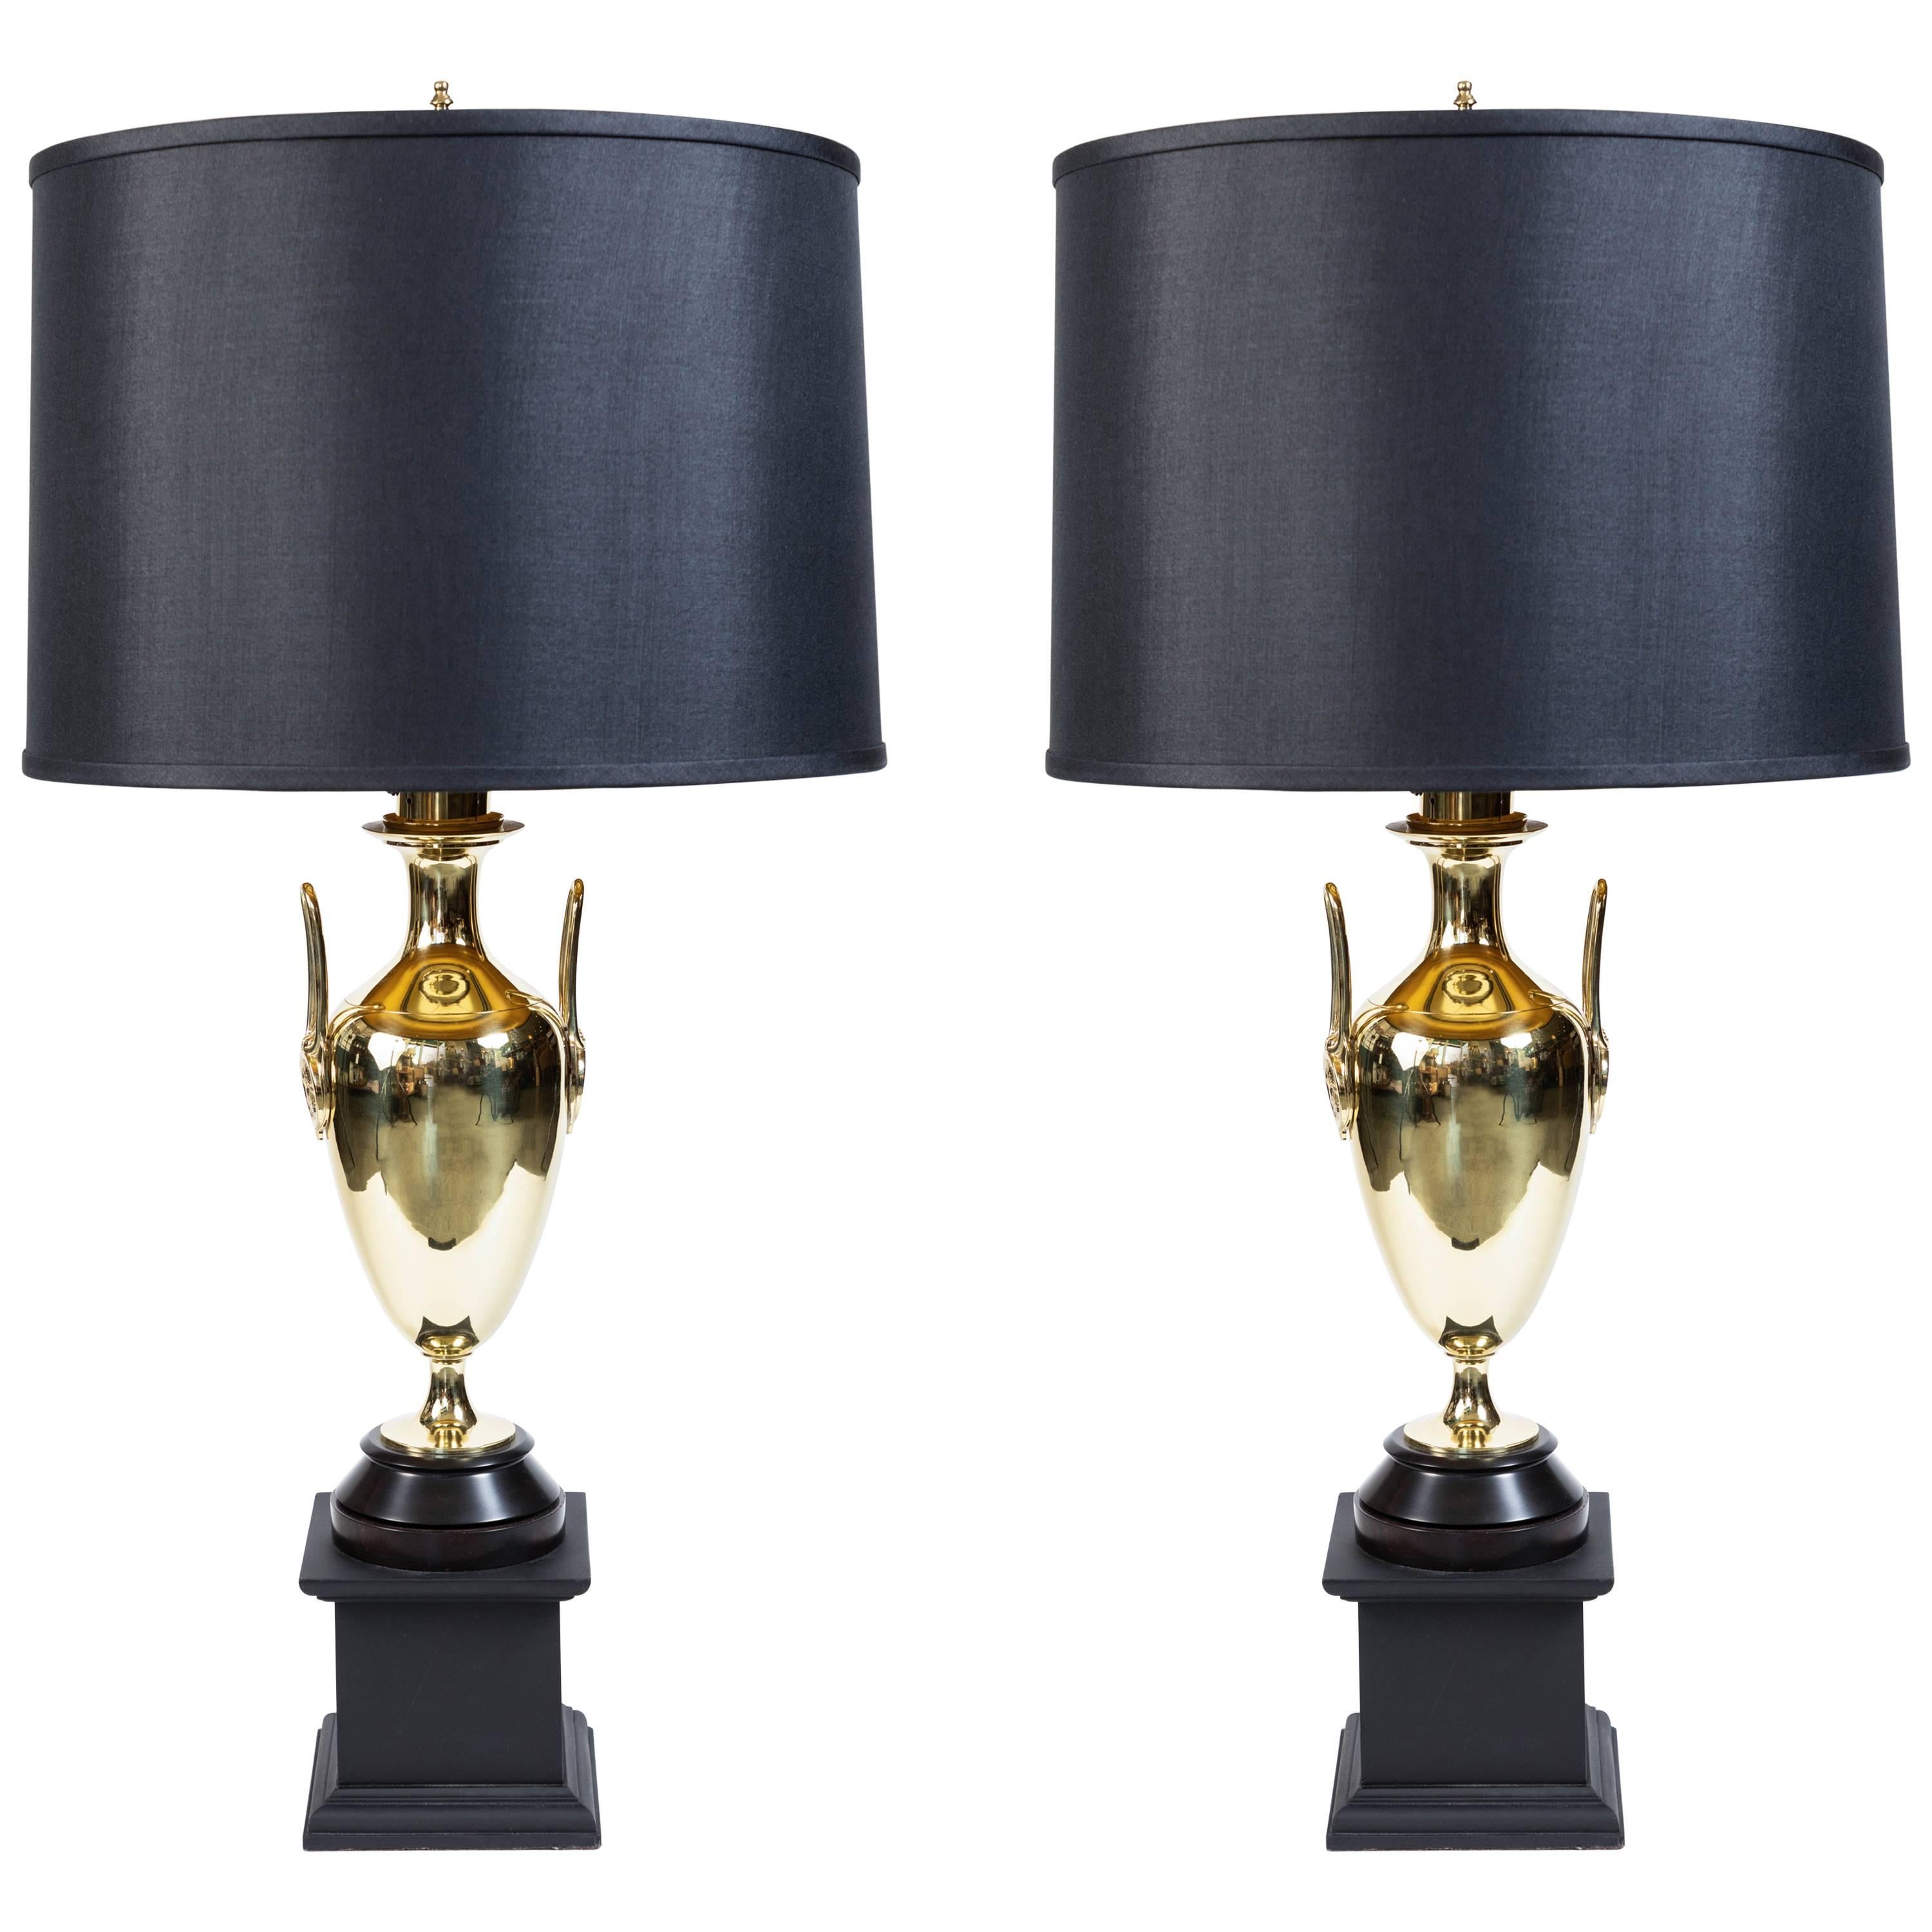 Pair of Vintage Brass Trophy Lamps